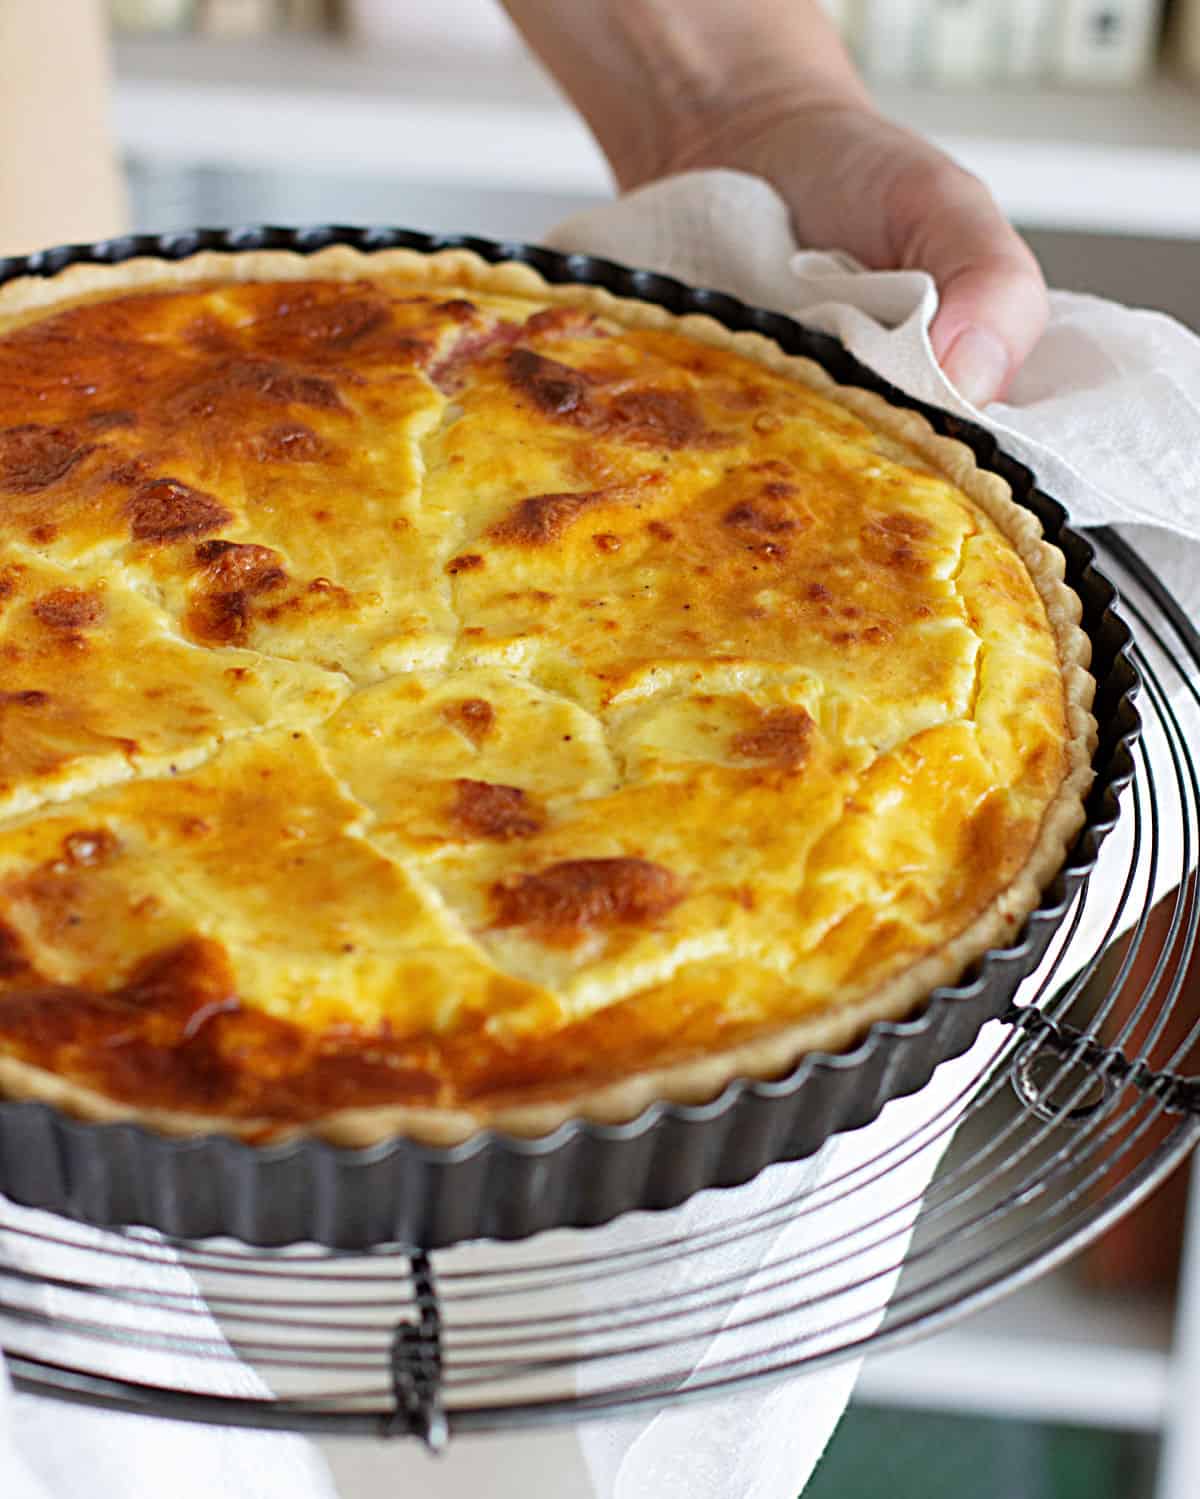 Hands holding whole ham and cheese quiche in metal pan